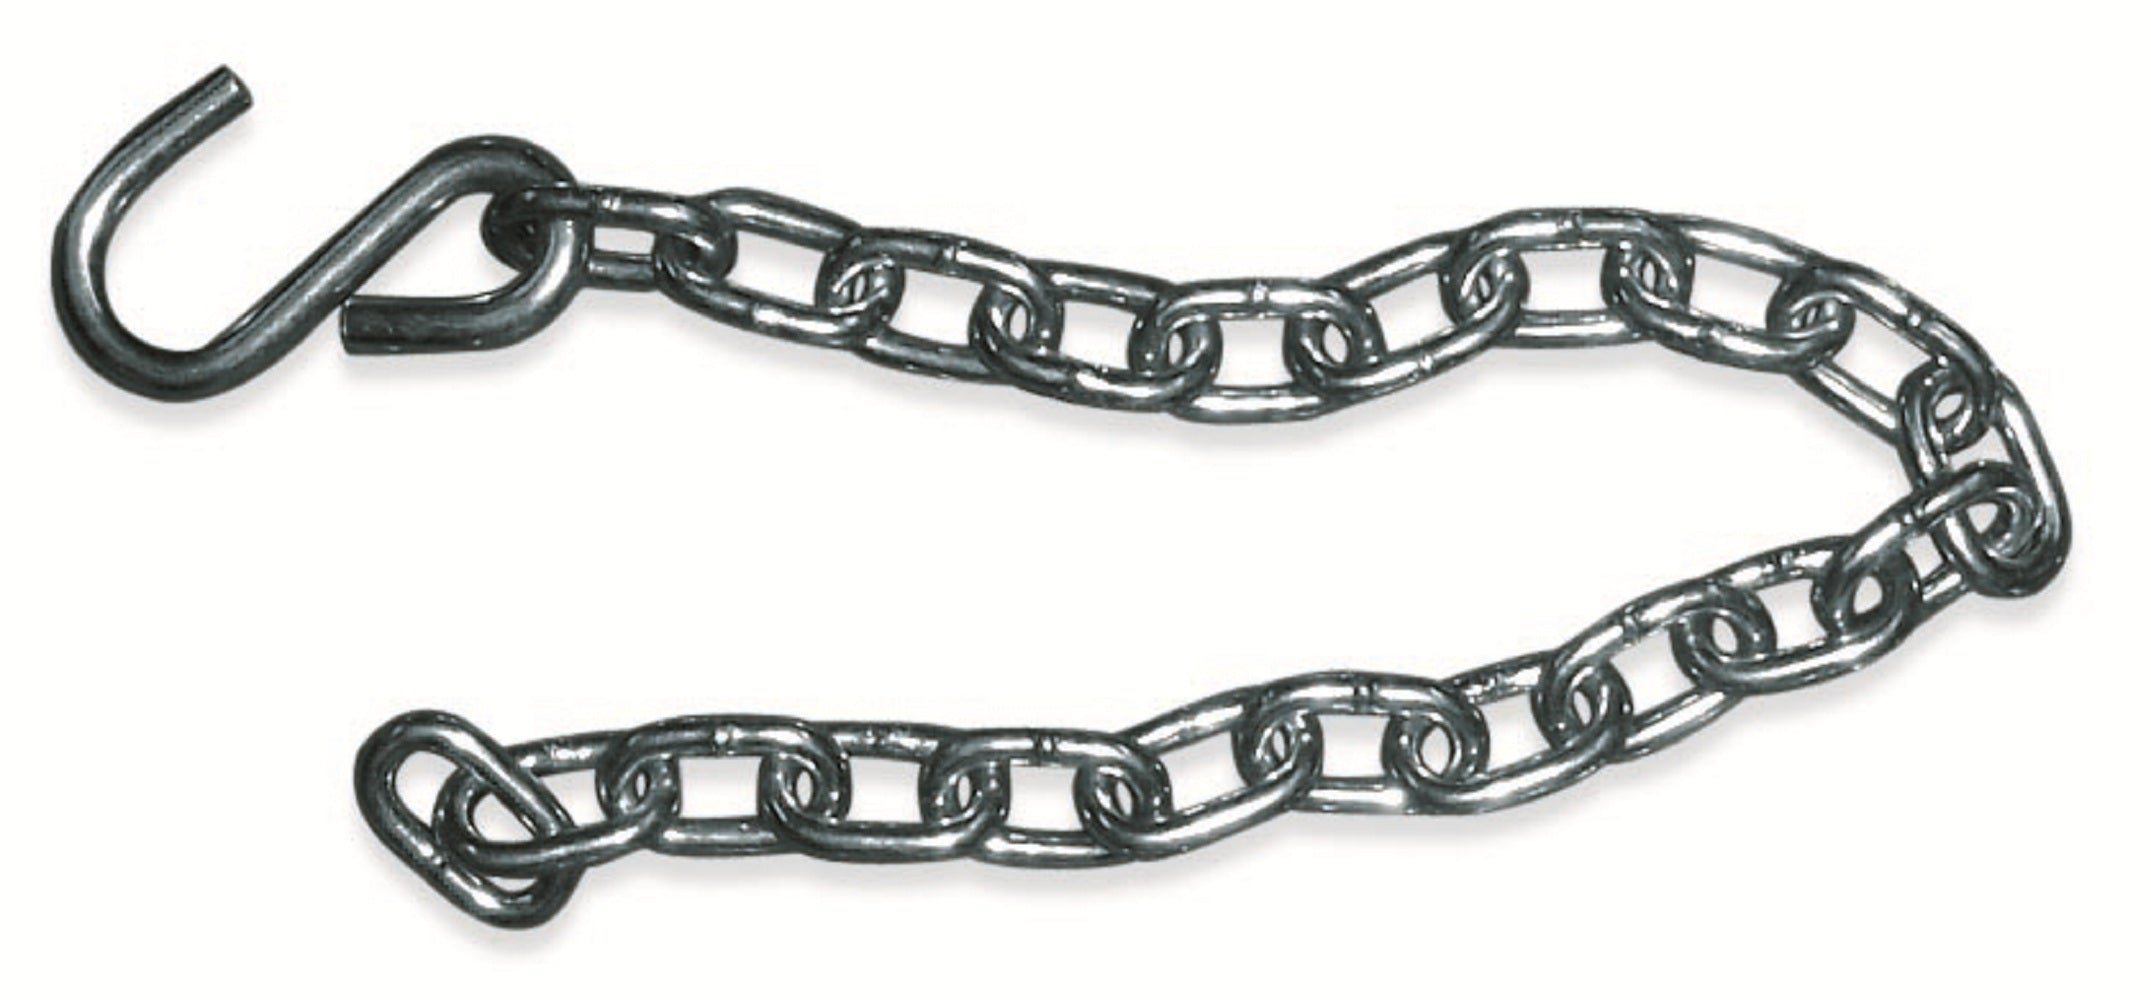 Hangit Steel Links Chain with S-hook,A Set of 2, Silver, 20 links, 2 feet long